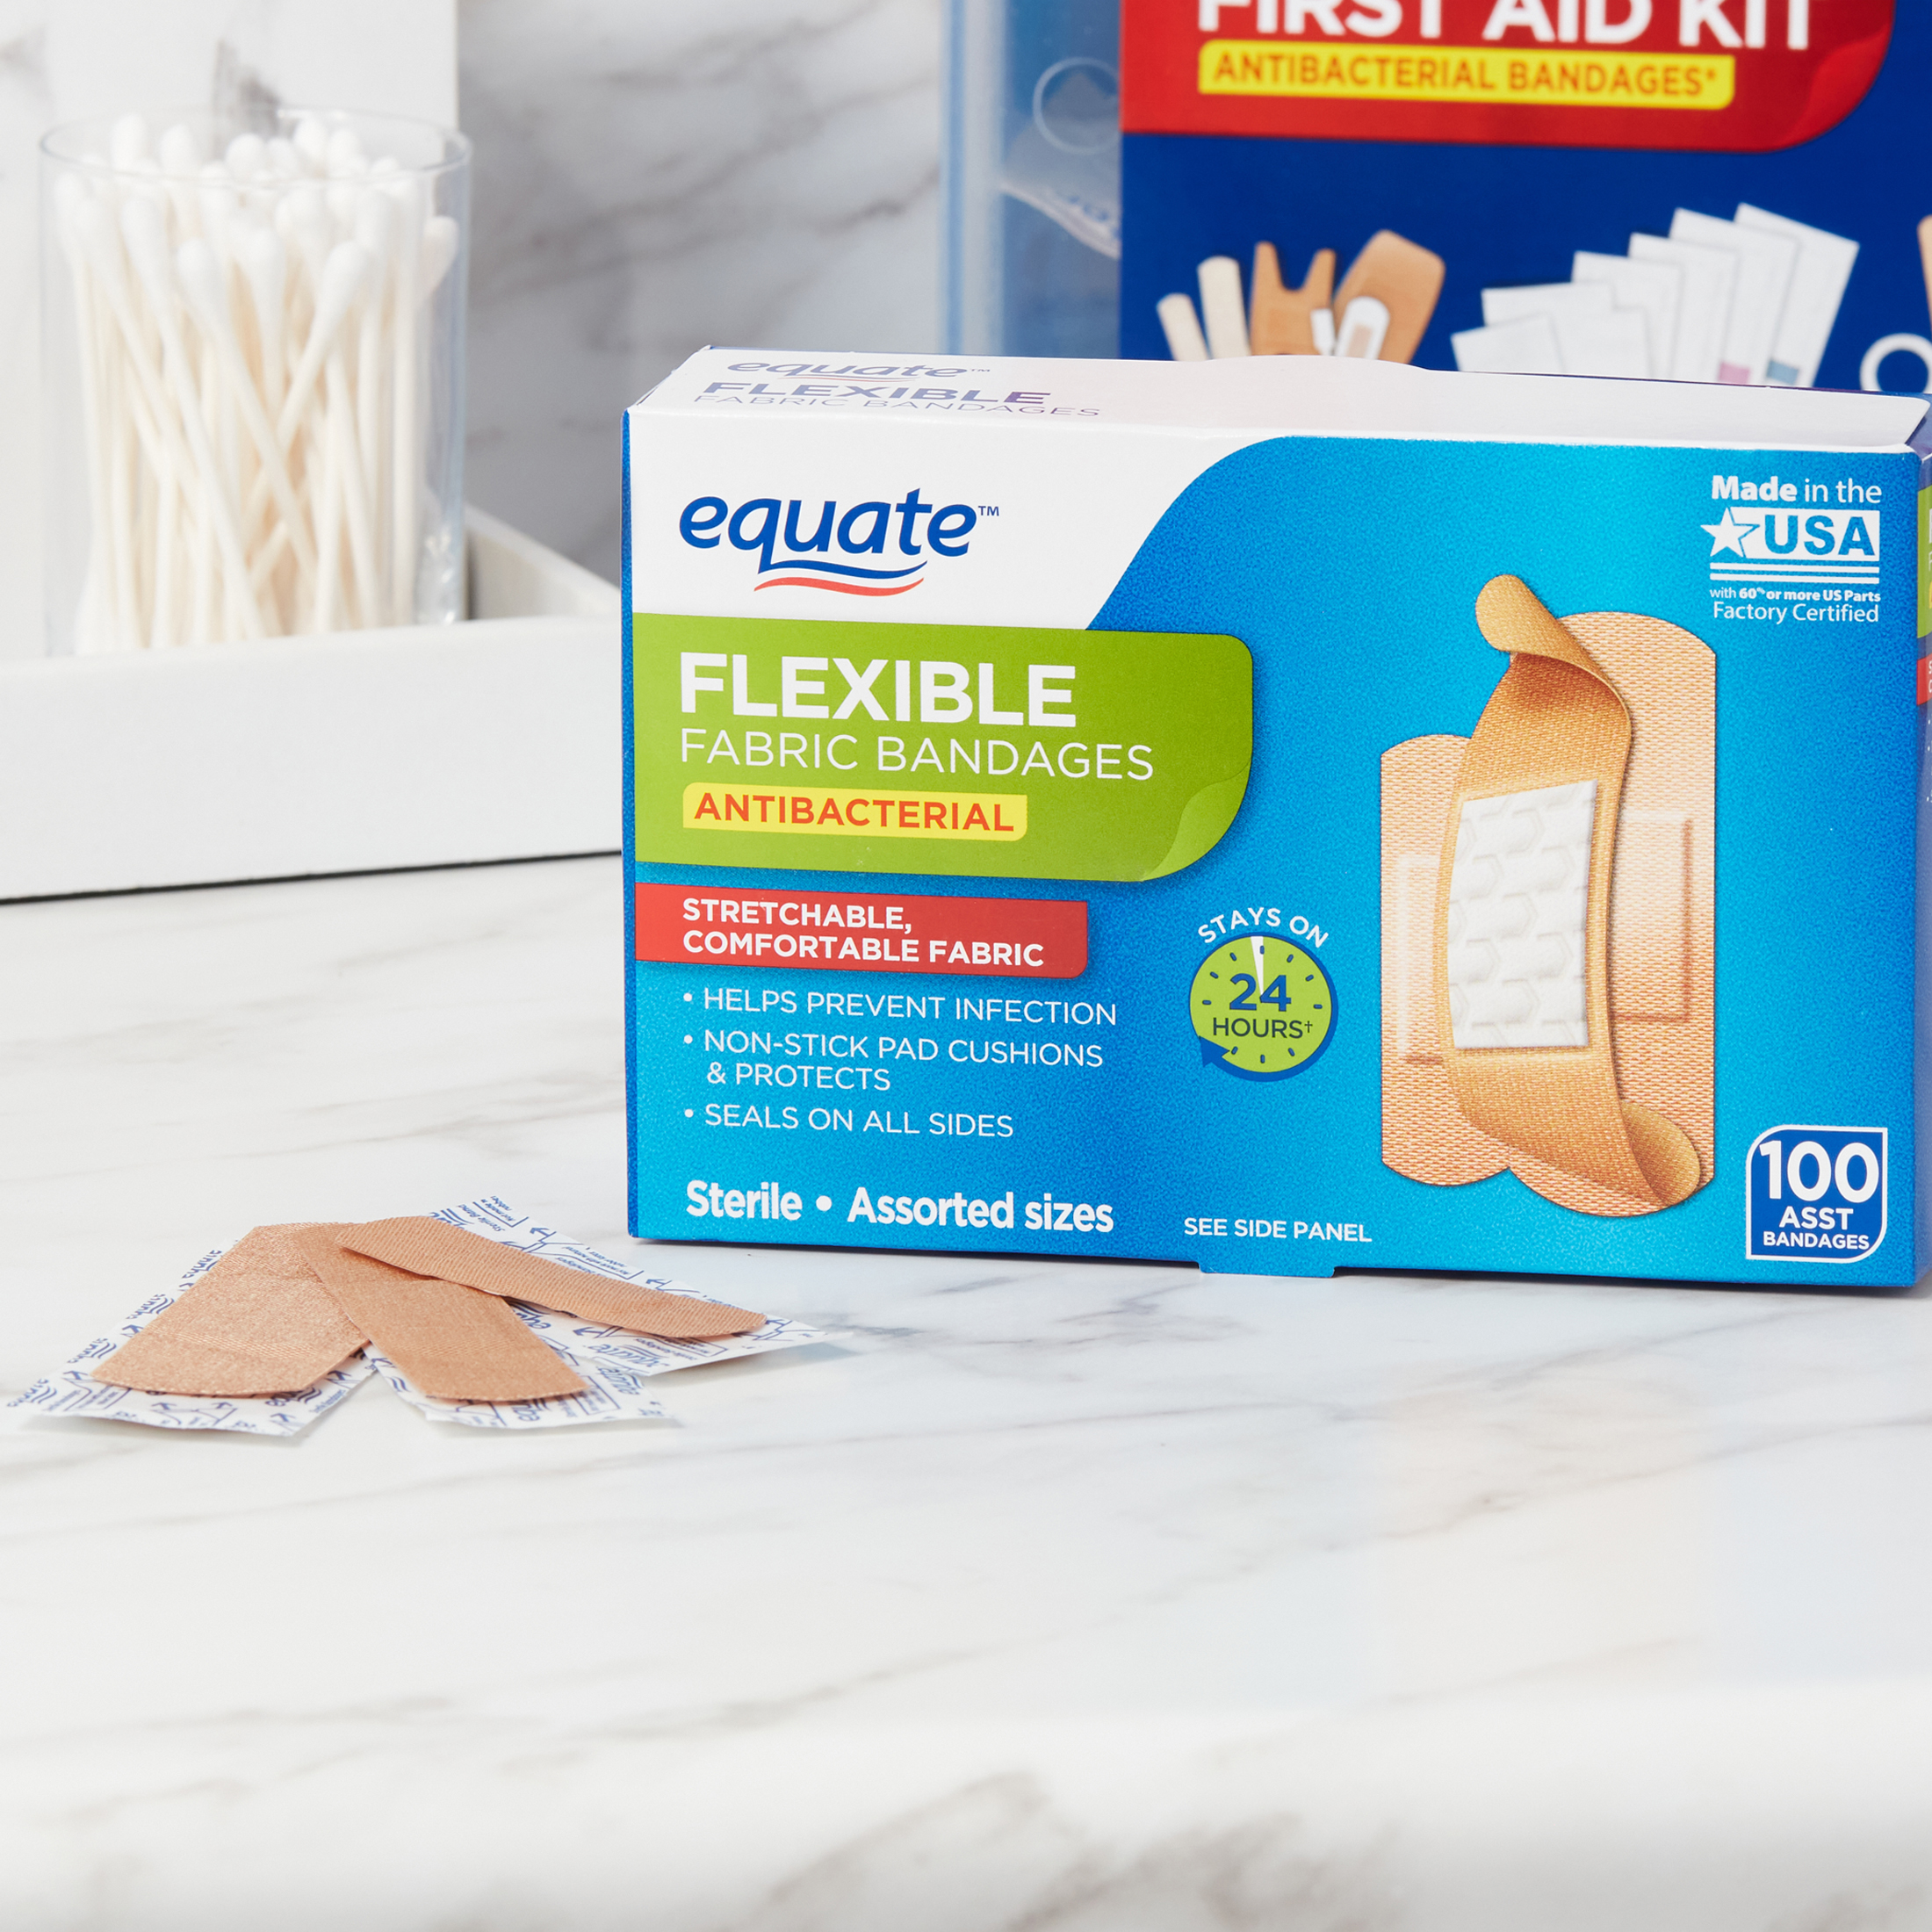 Equate Antibacterial Flexible Fabric Bandages, 100 Count - image 4 of 6